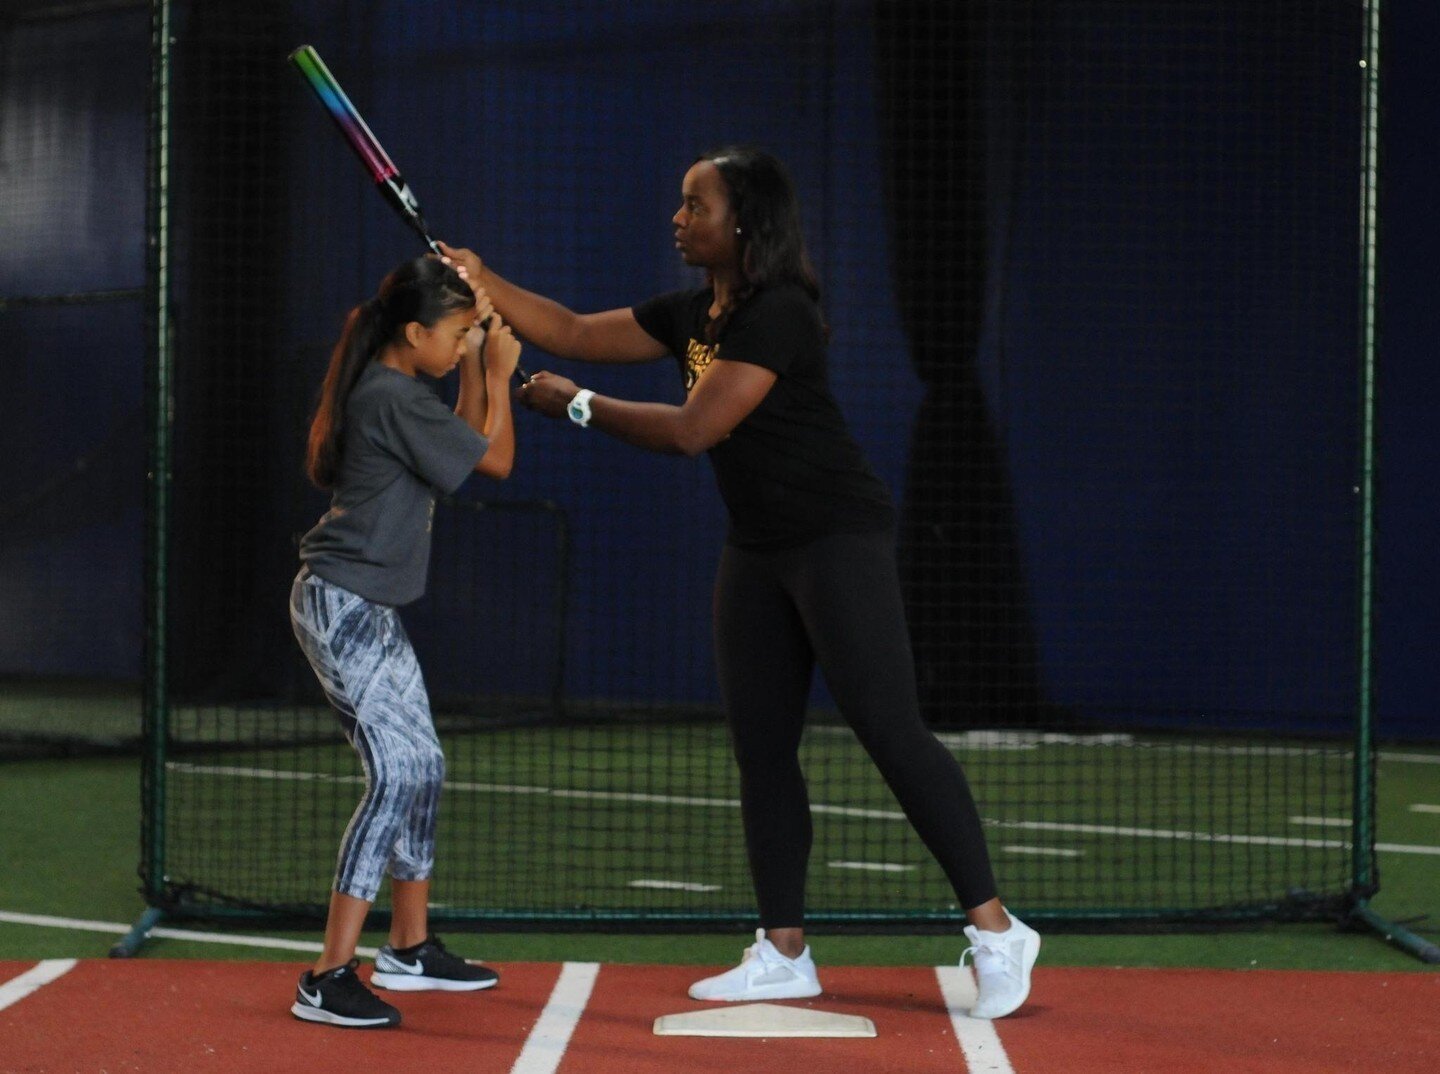 A wise coach once told me &quot;Be patient with your rate of success&rdquo;. Truly living by this makes the daily grind manageable.

Been spending a lot of time w/ my @WatleyCrew &amp; @gamechangers_natashawatley girls and I just love it when they ha